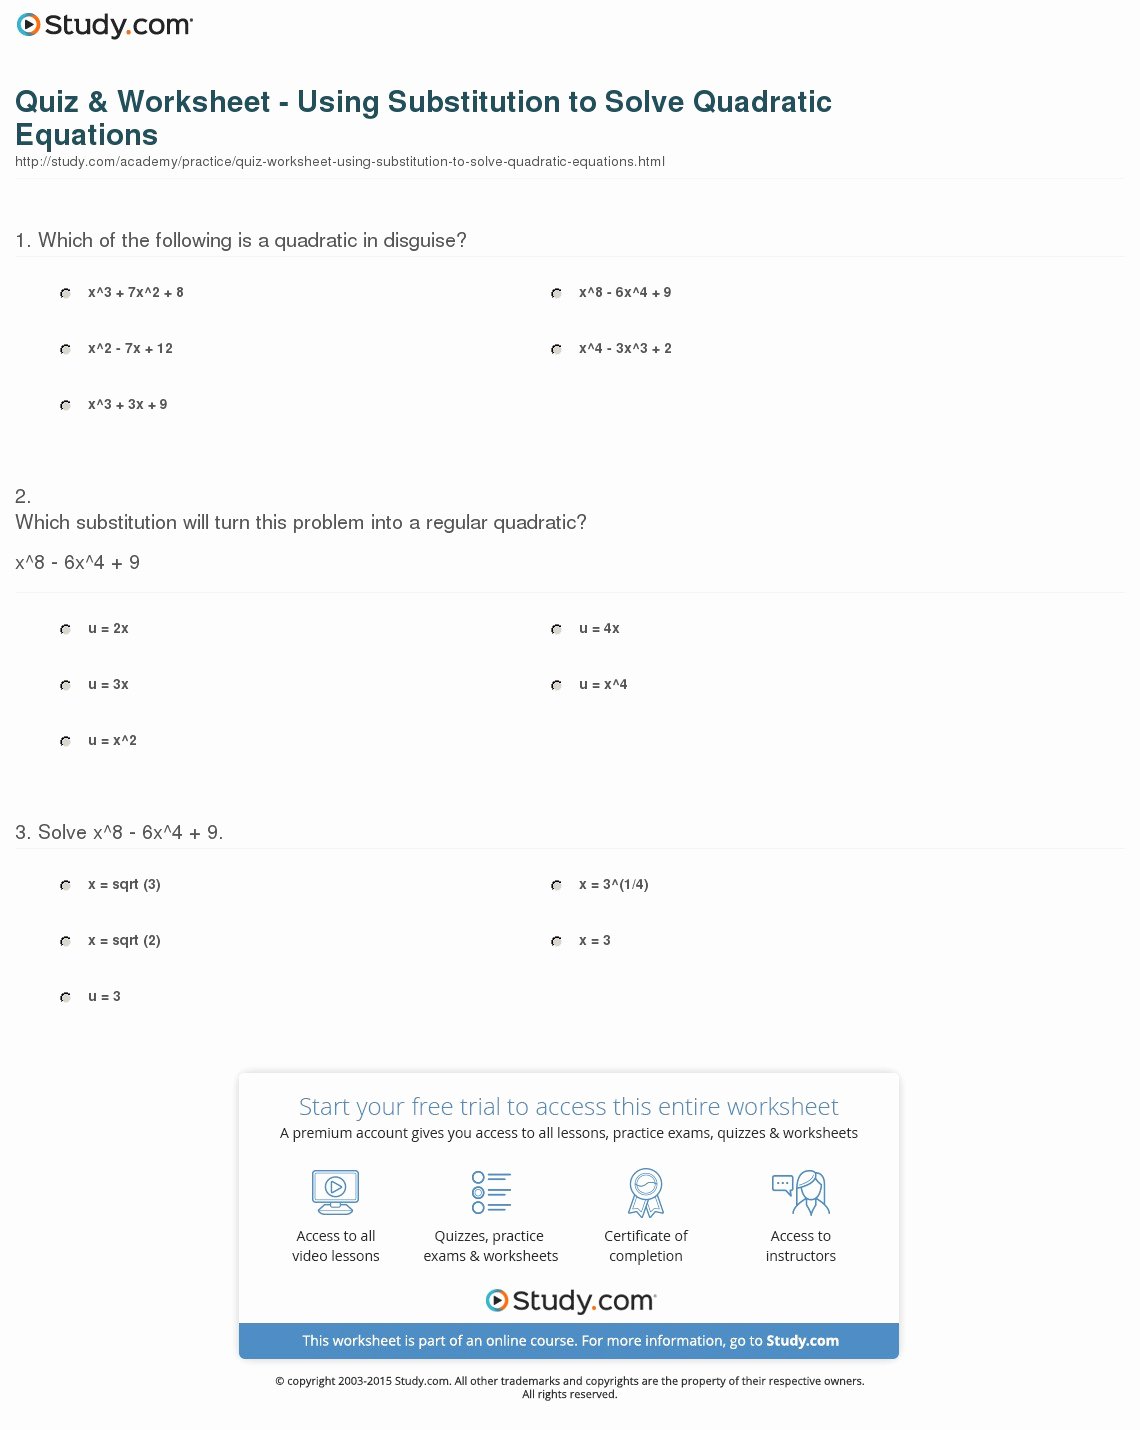 Quadratic Equation Worksheet with Answers Awesome Quiz &amp; Worksheet Using Substitution to solve Quadratic